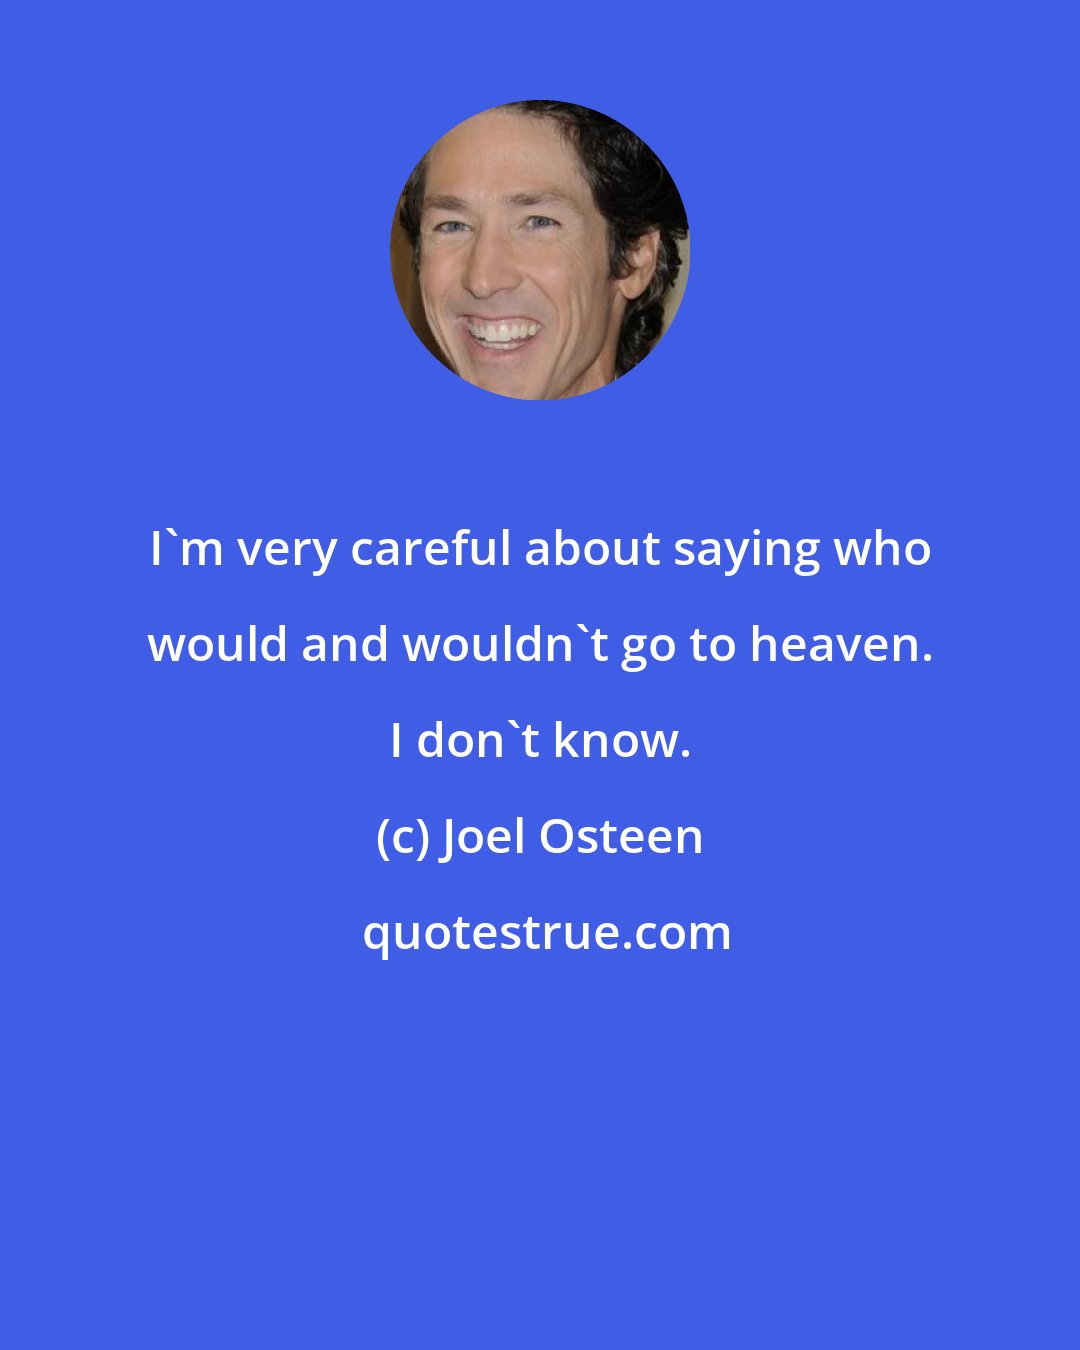 Joel Osteen: I'm very careful about saying who would and wouldn't go to heaven. I don't know.